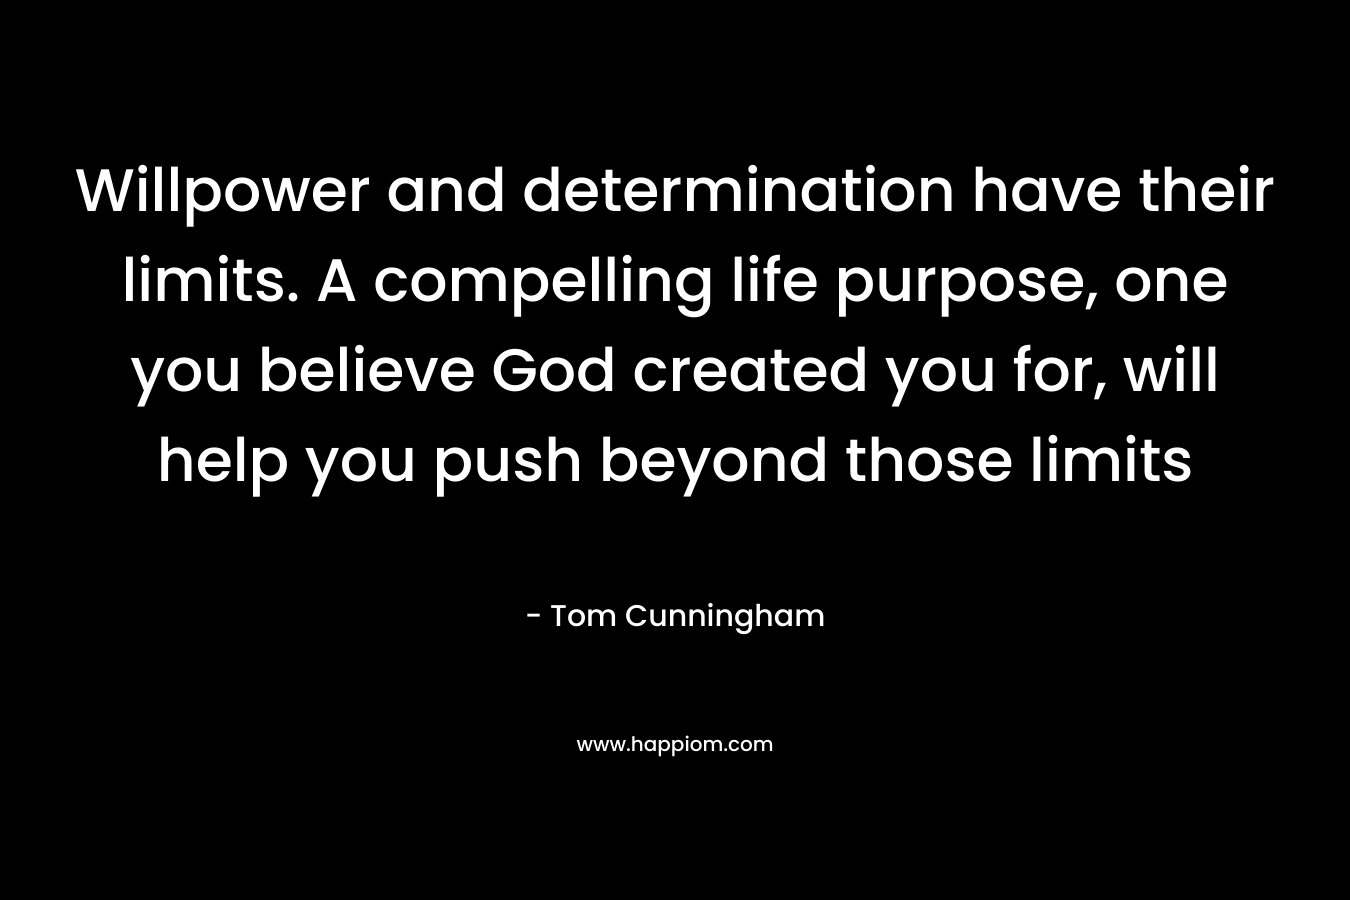 Willpower and determination have their limits. A compelling life purpose, one you believe God created you for, will help you push beyond those limits